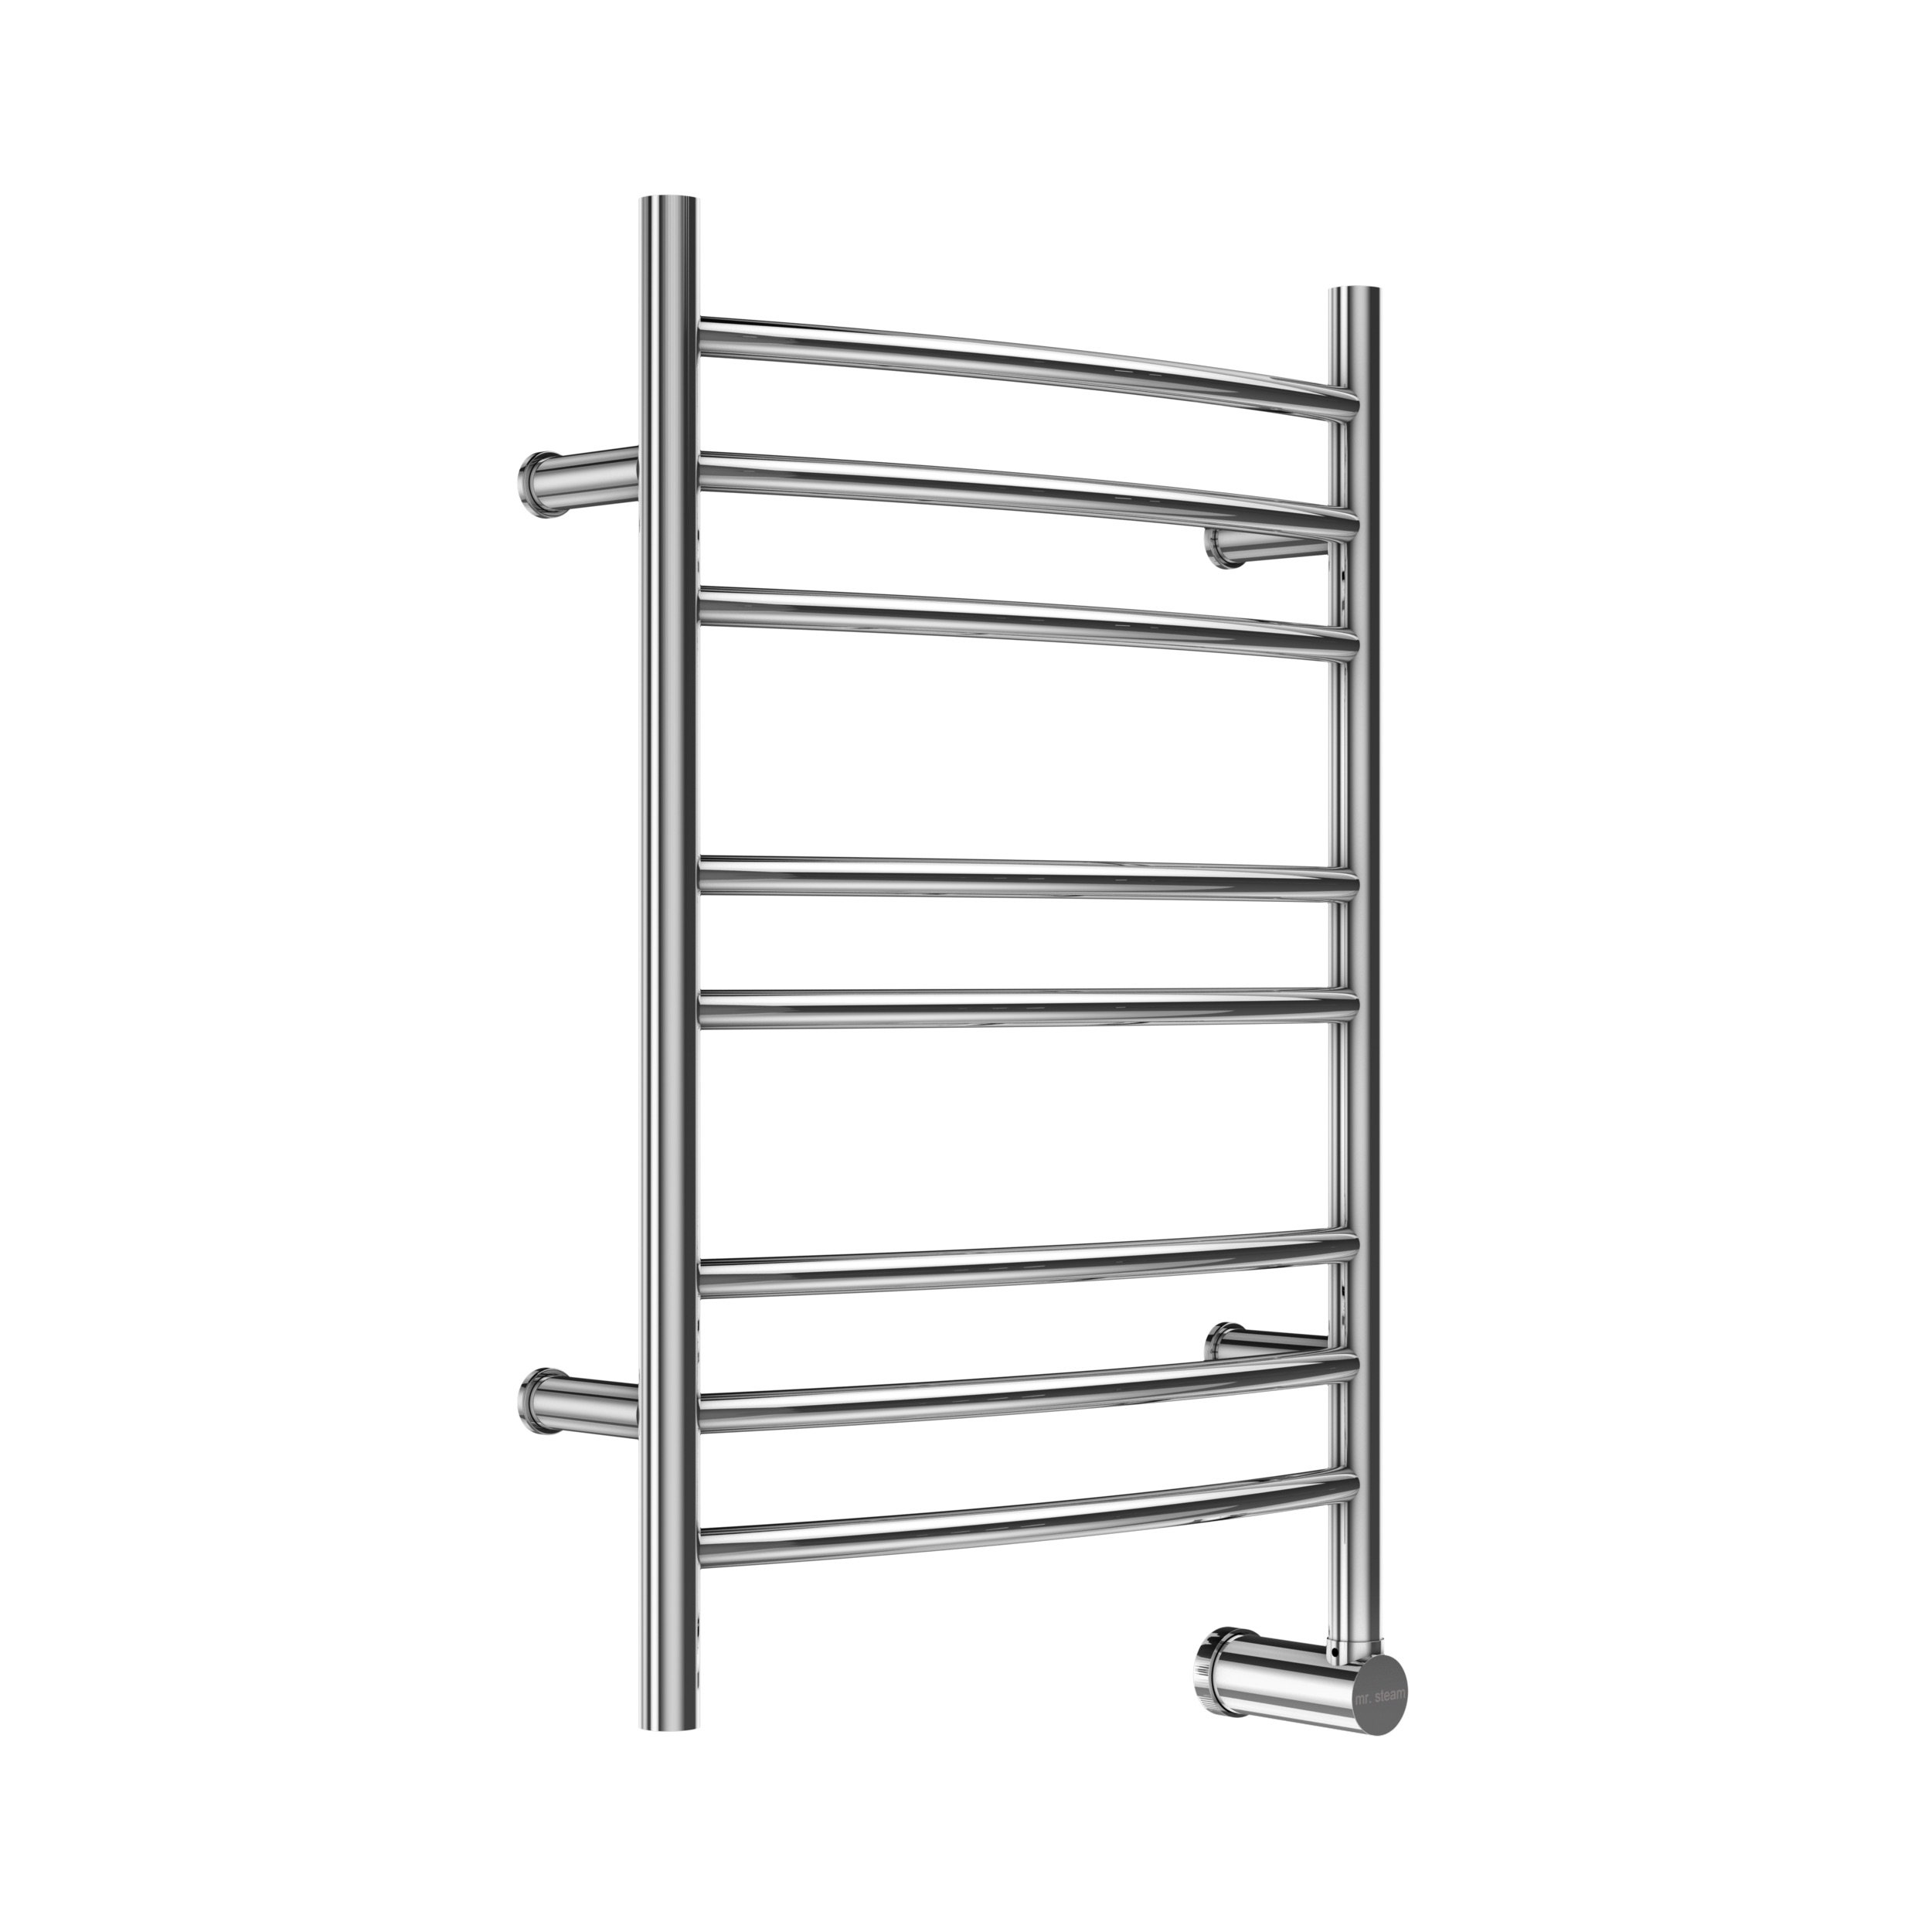 MrSteam Towel Warmer W328 Stainless Steel Polished Isolated